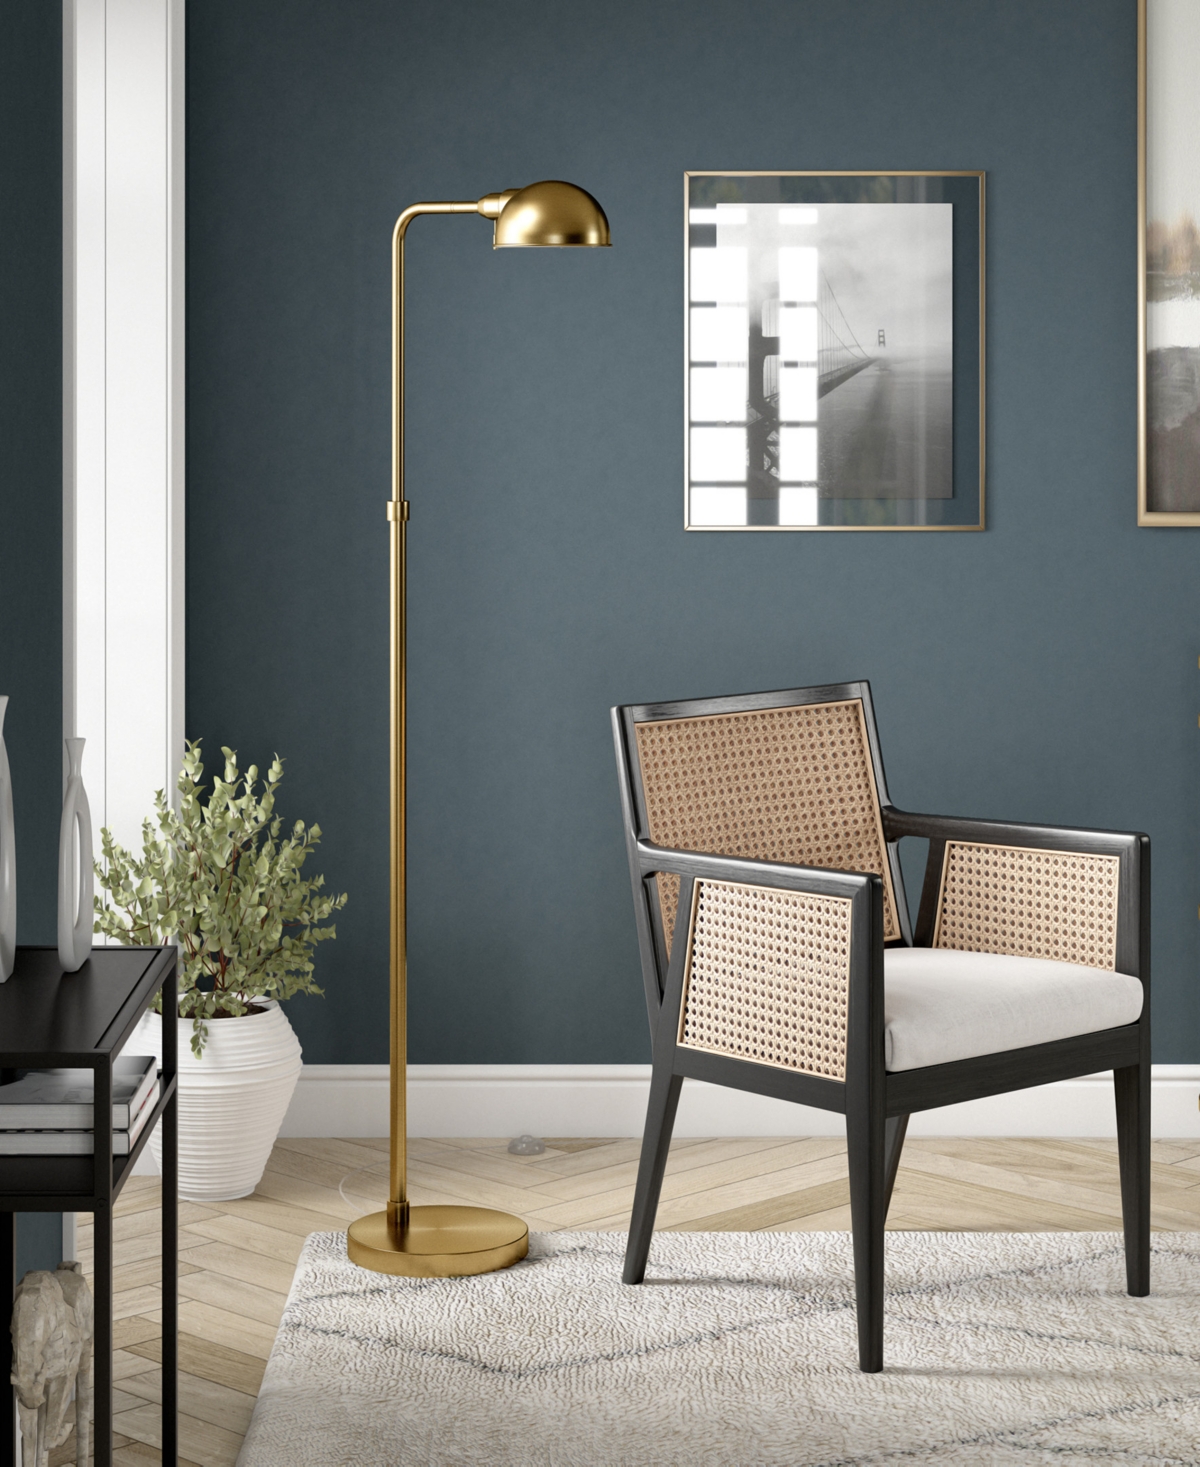 Shop Hudson & Canal Arundel 66" Tall Integrated Led Floor Lamp With Metal Shade In Brushed Brass